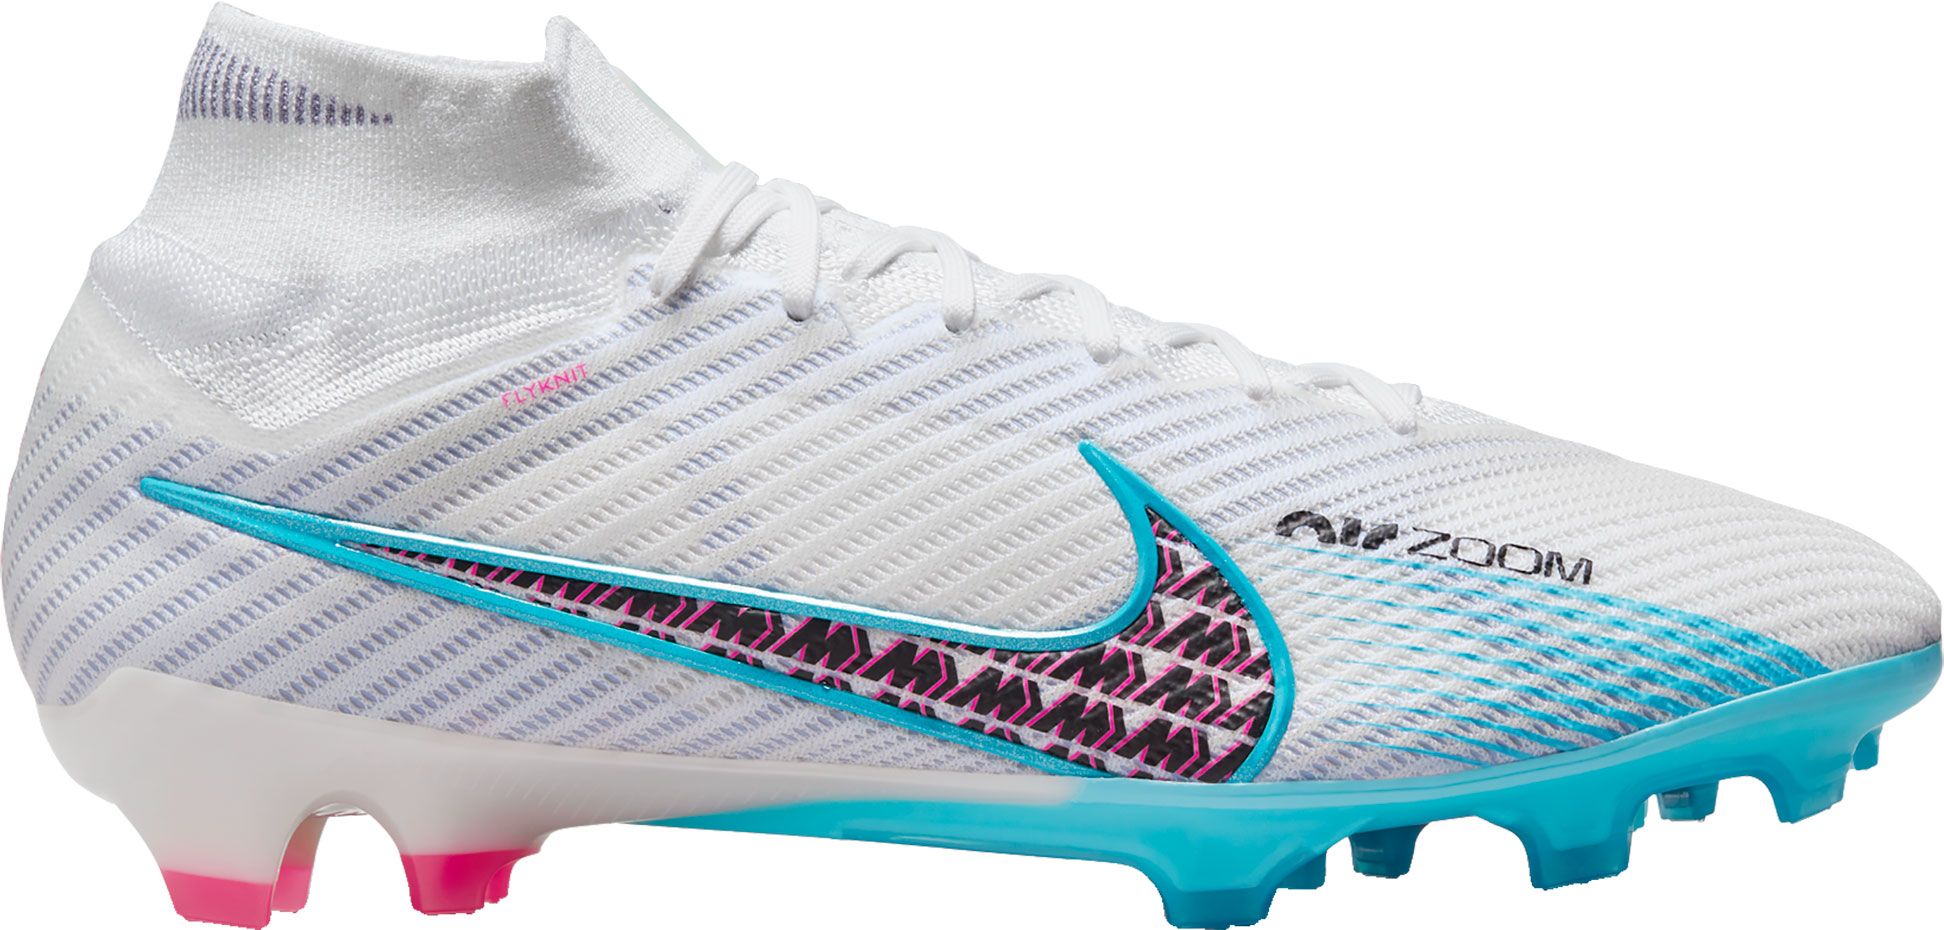 13 Best Soccer Cleats, Incl. Nike and Adidas, Reviewed 2018